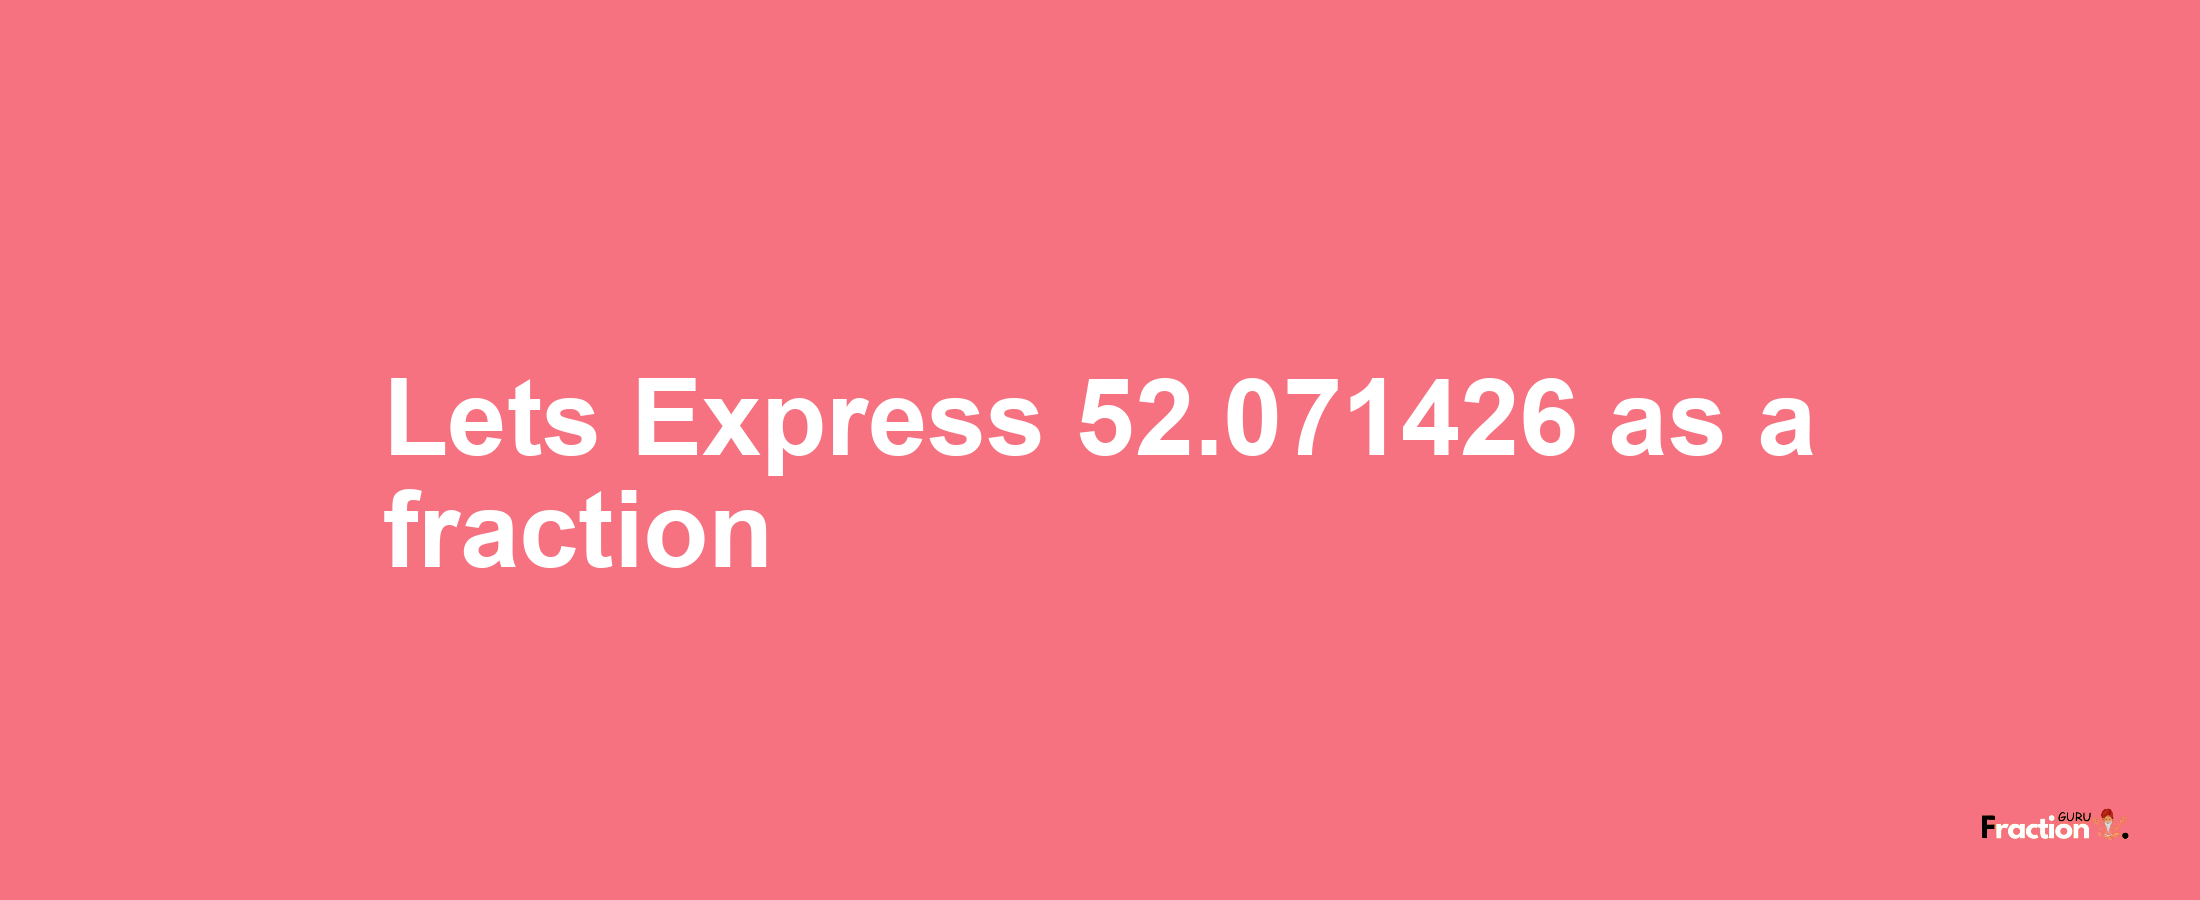 Lets Express 52.071426 as afraction